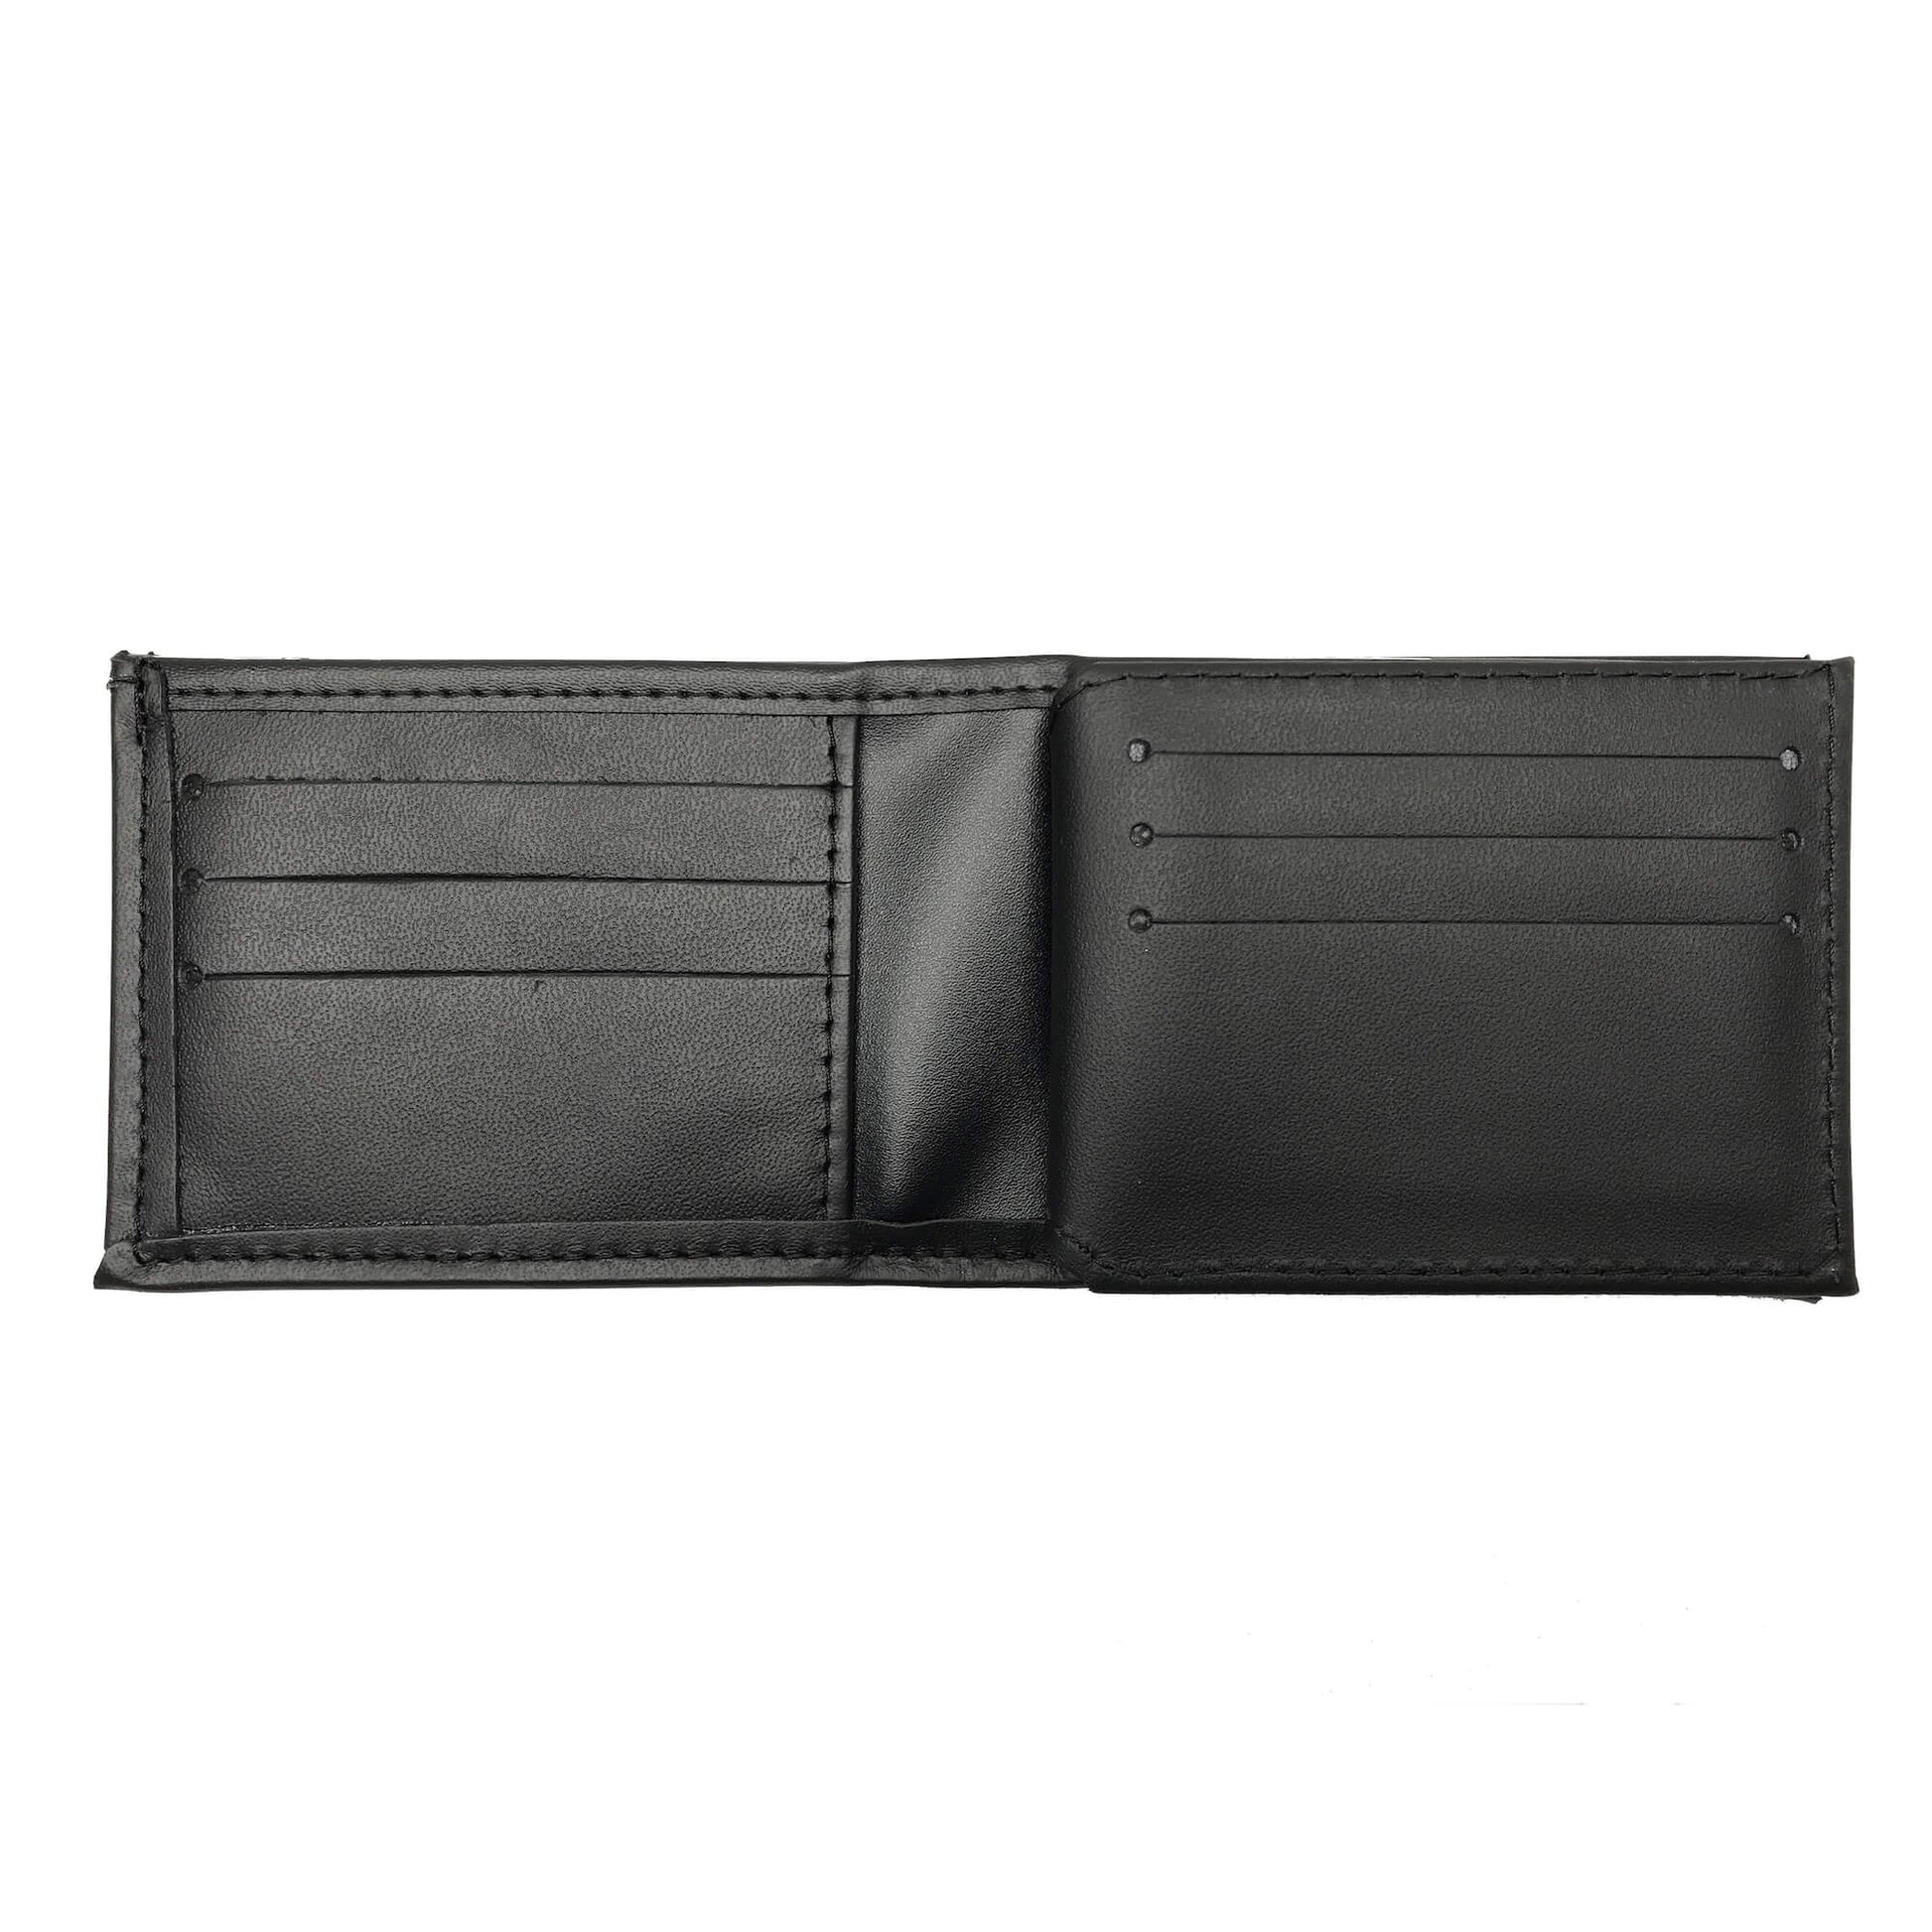 U.S. Federal Protective Service - FPS (2.5in) Horizontal Bifold Hidden Badge Wallet-Perfect Fit-911 Duty Gear USA